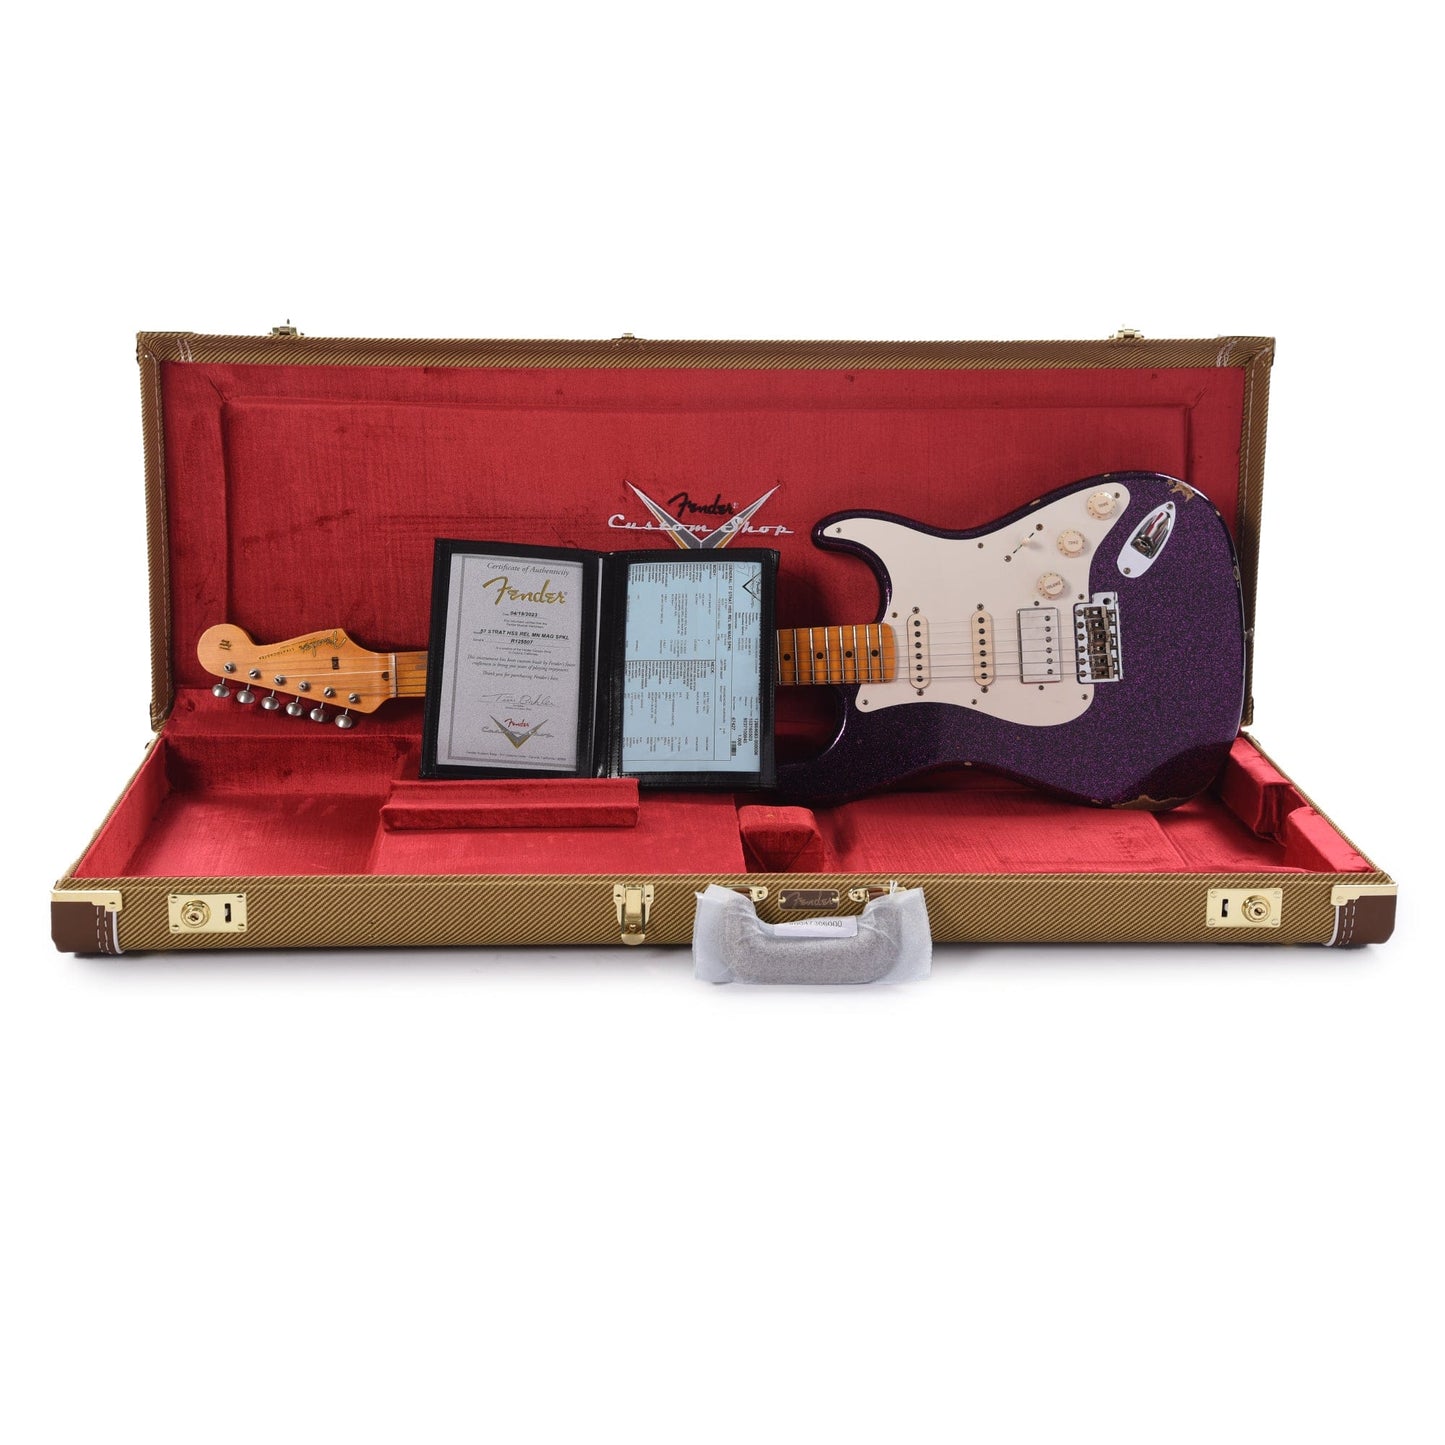 Fender Custom Shop 1957 Stratocaster HSS "Chicago Special" Relic Magenta Sparkle w/Lollar Imperial Low Wind Humbucker Electric Guitars / Solid Body